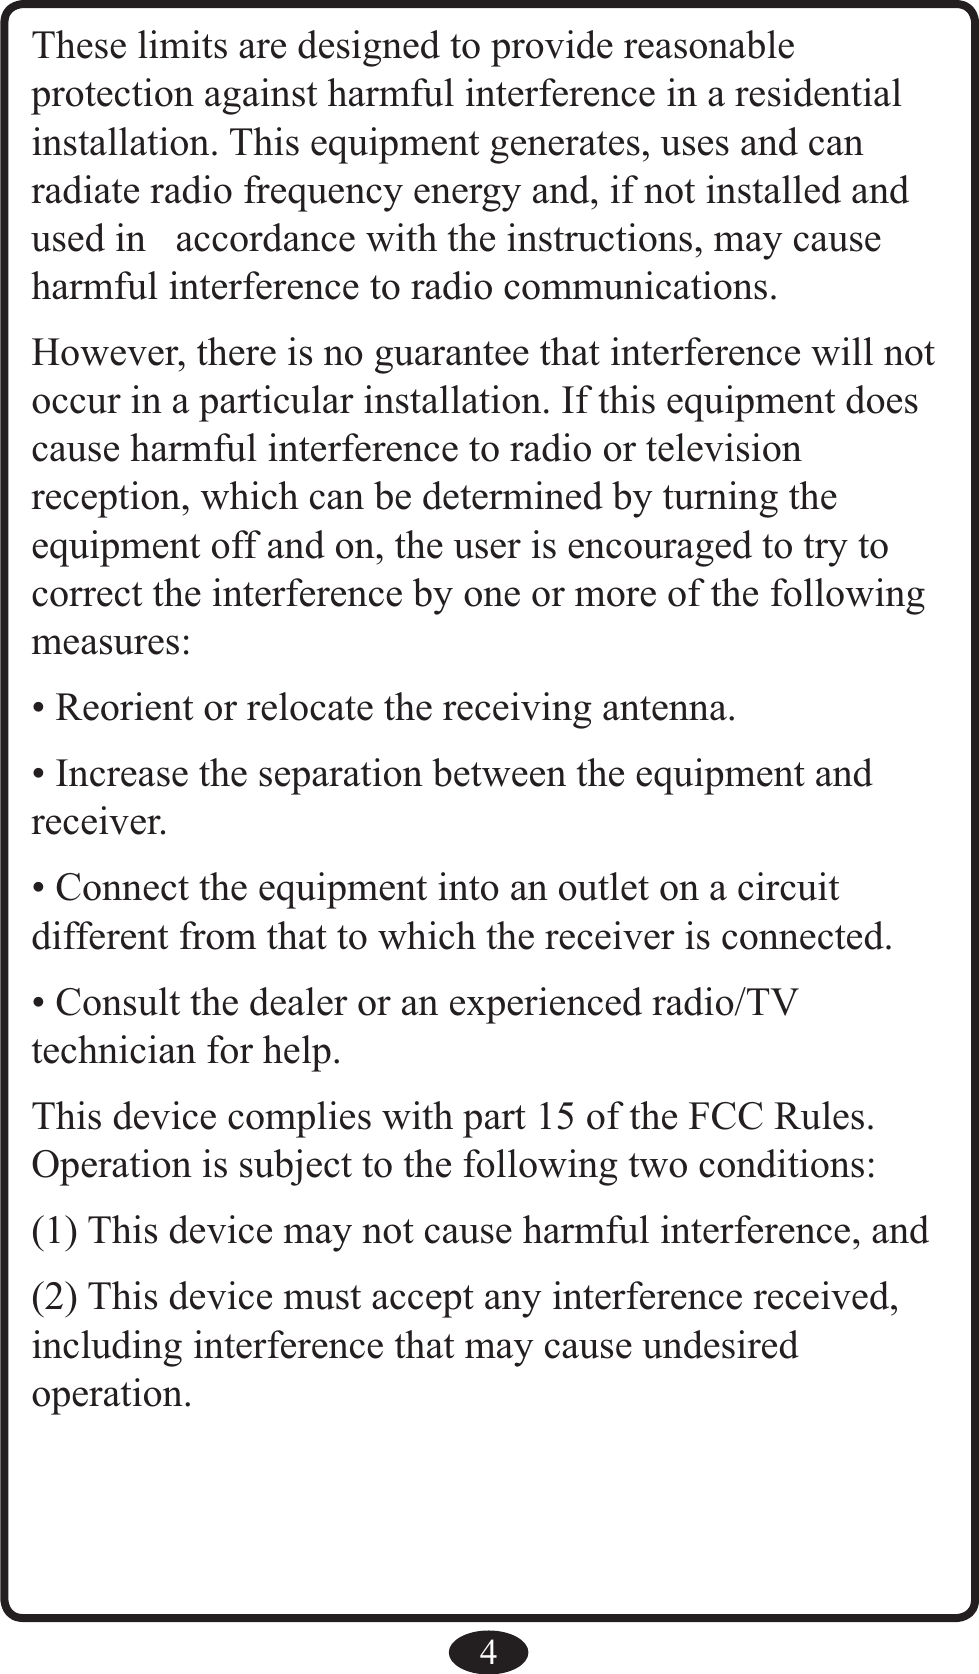 4These limits are designed to provide reasonable  protection against harmful interference in a residential installation. This equipment generates, uses and can radiate radio frequency energy and, if not installed and used in  accordance with the instructions, may cause harmful interference to radio communications.However, there is no guarantee that interference will not occur in a particular installation. If this equipment does cause harmful interference to radio or television reception, which can be determined by turning the equipment off and on, the user is encouraged to try to correct the interference by one or more of the following measures:• Reorient or relocate the receiving antenna.• Increase the separation between the equipment and receiver.• Connect the equipment into an outlet on a circuit different from that to which the receiver is connected.• Consult the dealer or an experienced radio/TV technician for help.This device complies with part 15 of the FCC Rules.Operation is subject to the following two conditions:(1) This device may not cause harmful interference, and (2) This device must accept any interference received, including interference that may cause undesired operation.